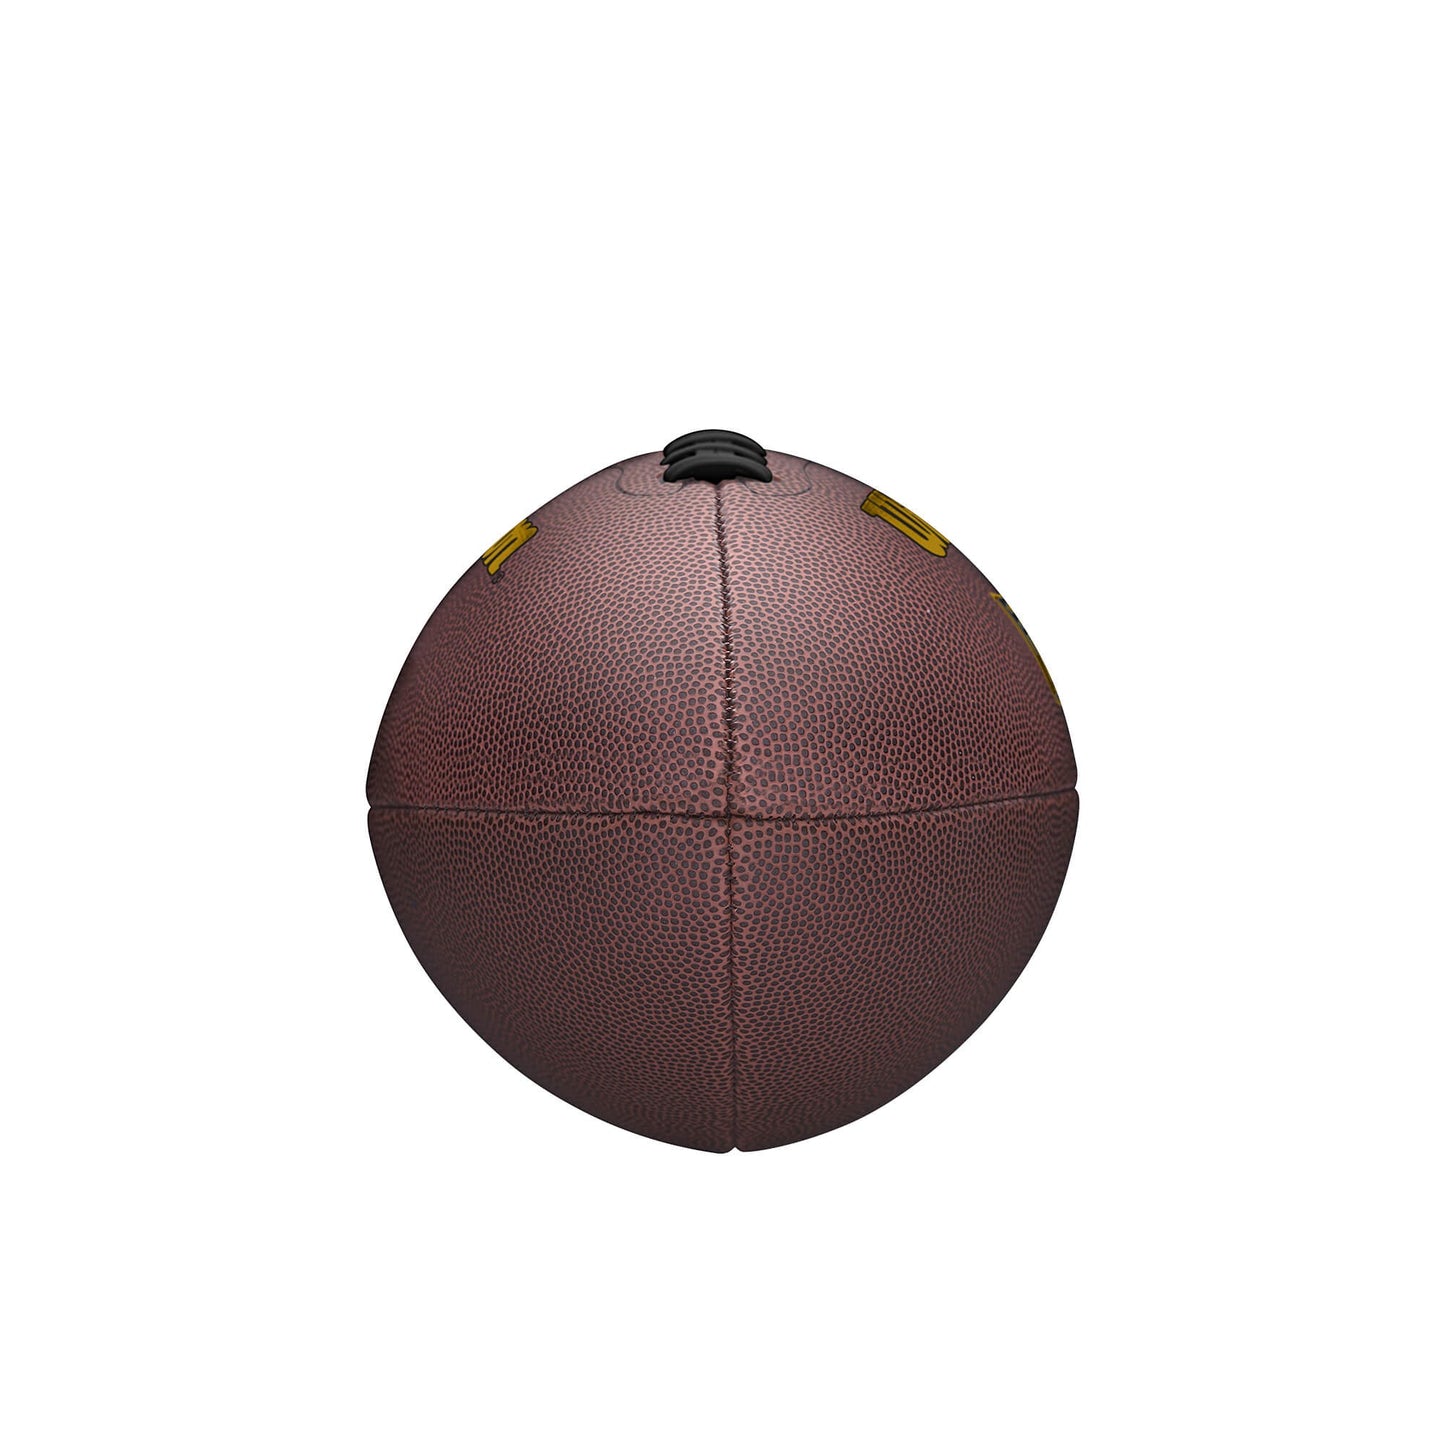 Wilson NFL Tailgate FB Off Brown (sz. Official)